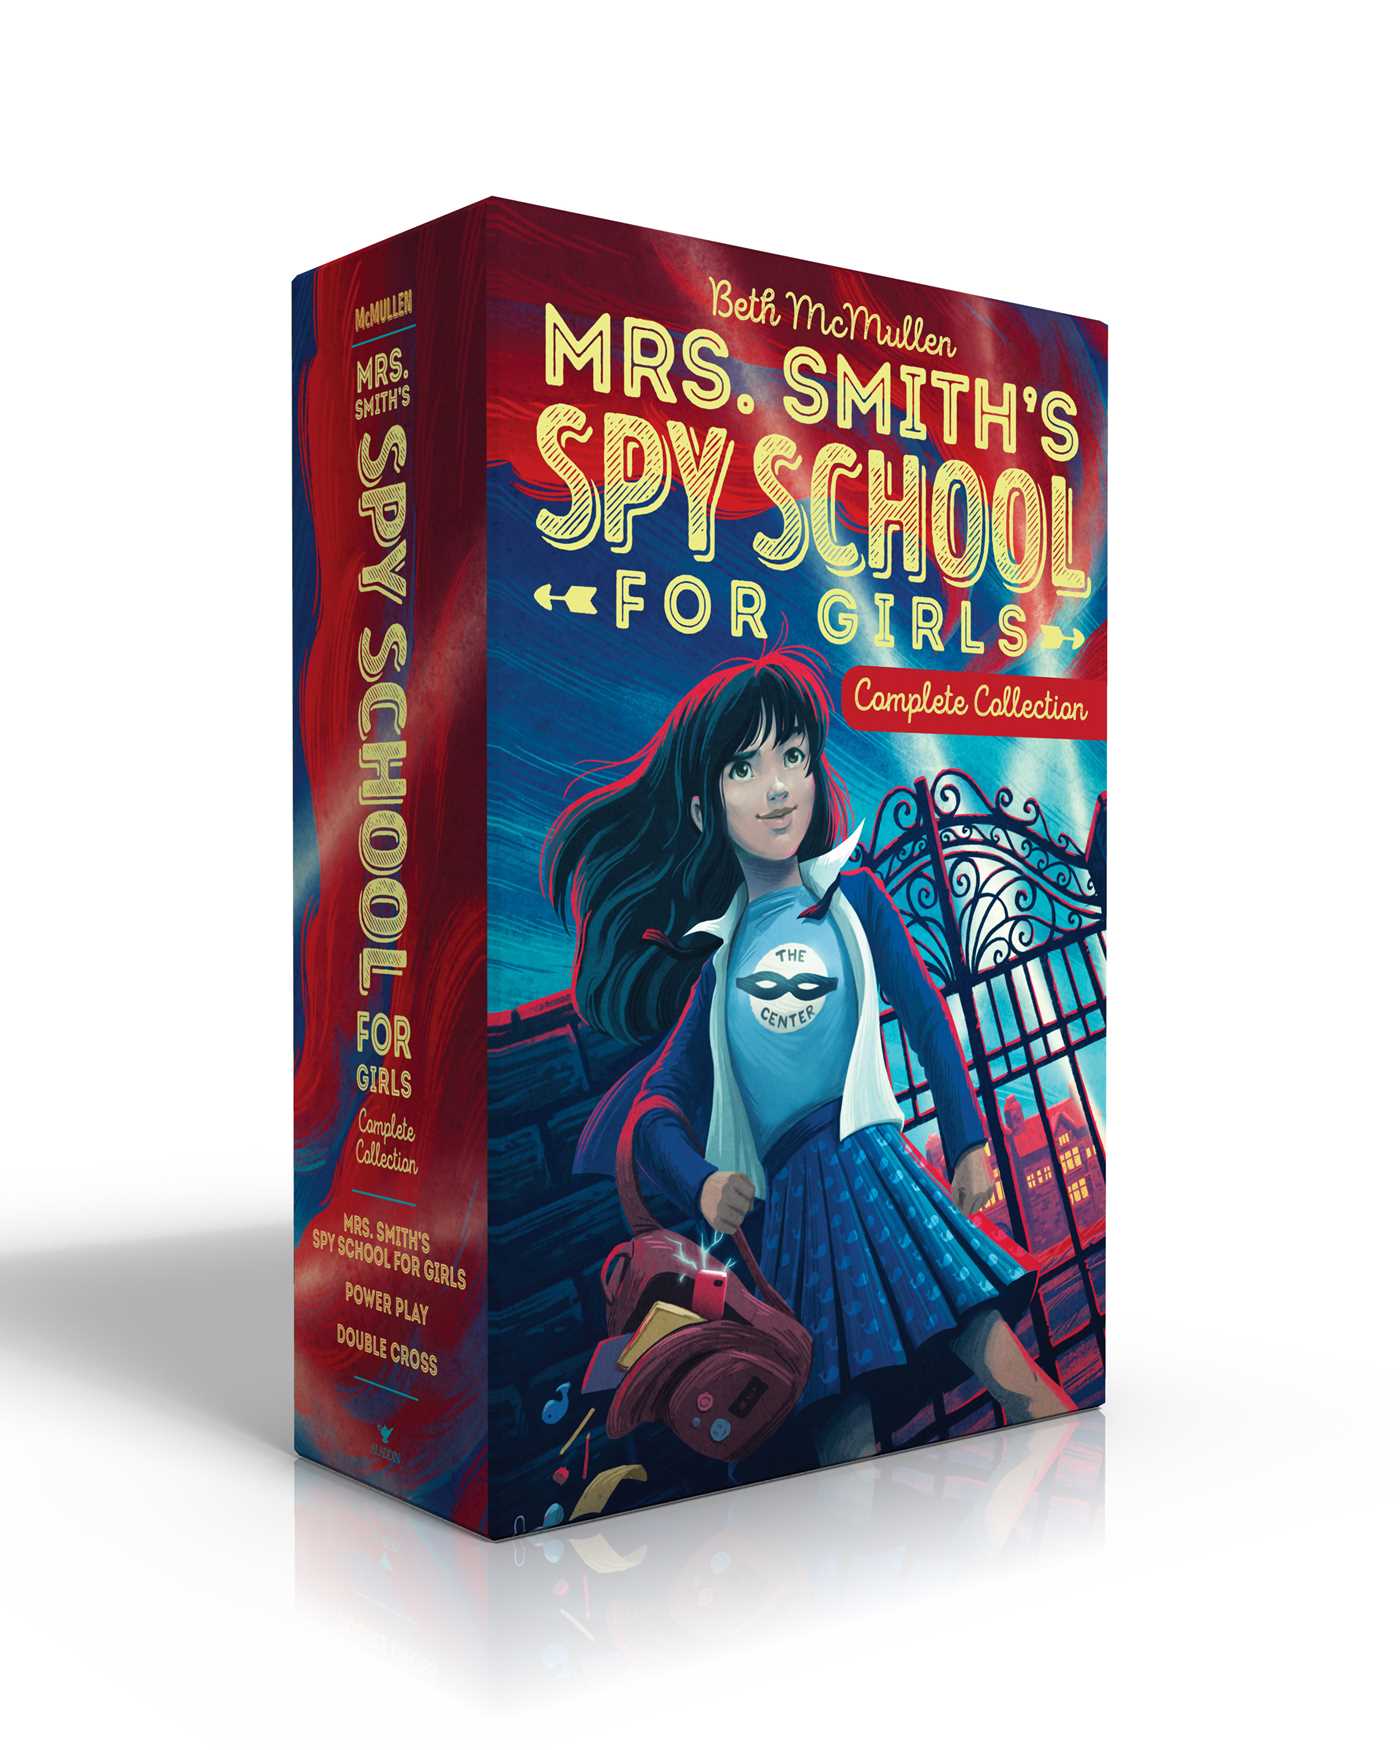 Mrs. Smith's Spy School for Girls Complete Collection (Boxed Set)